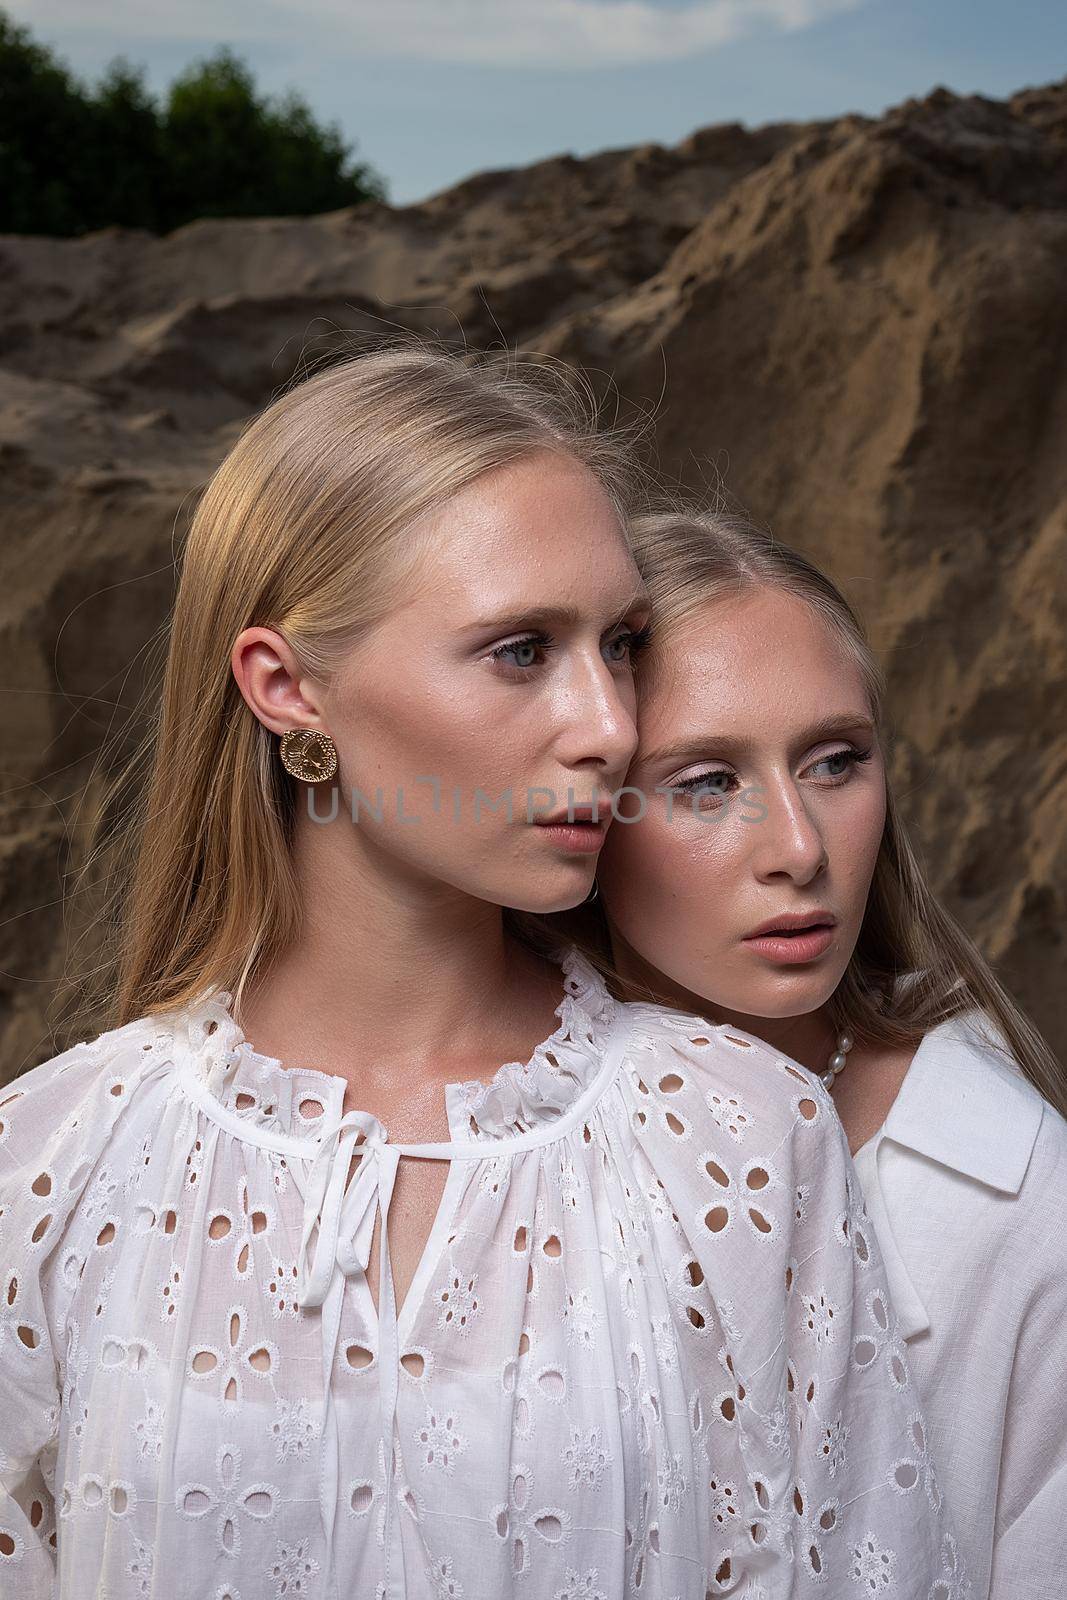 two young blond pretty twins posing at sand quarry in elegant white clothes. stylish glamorous fashion photoshoot with flashlight. girl holds her head on shoulder of her sister in front of sand wall